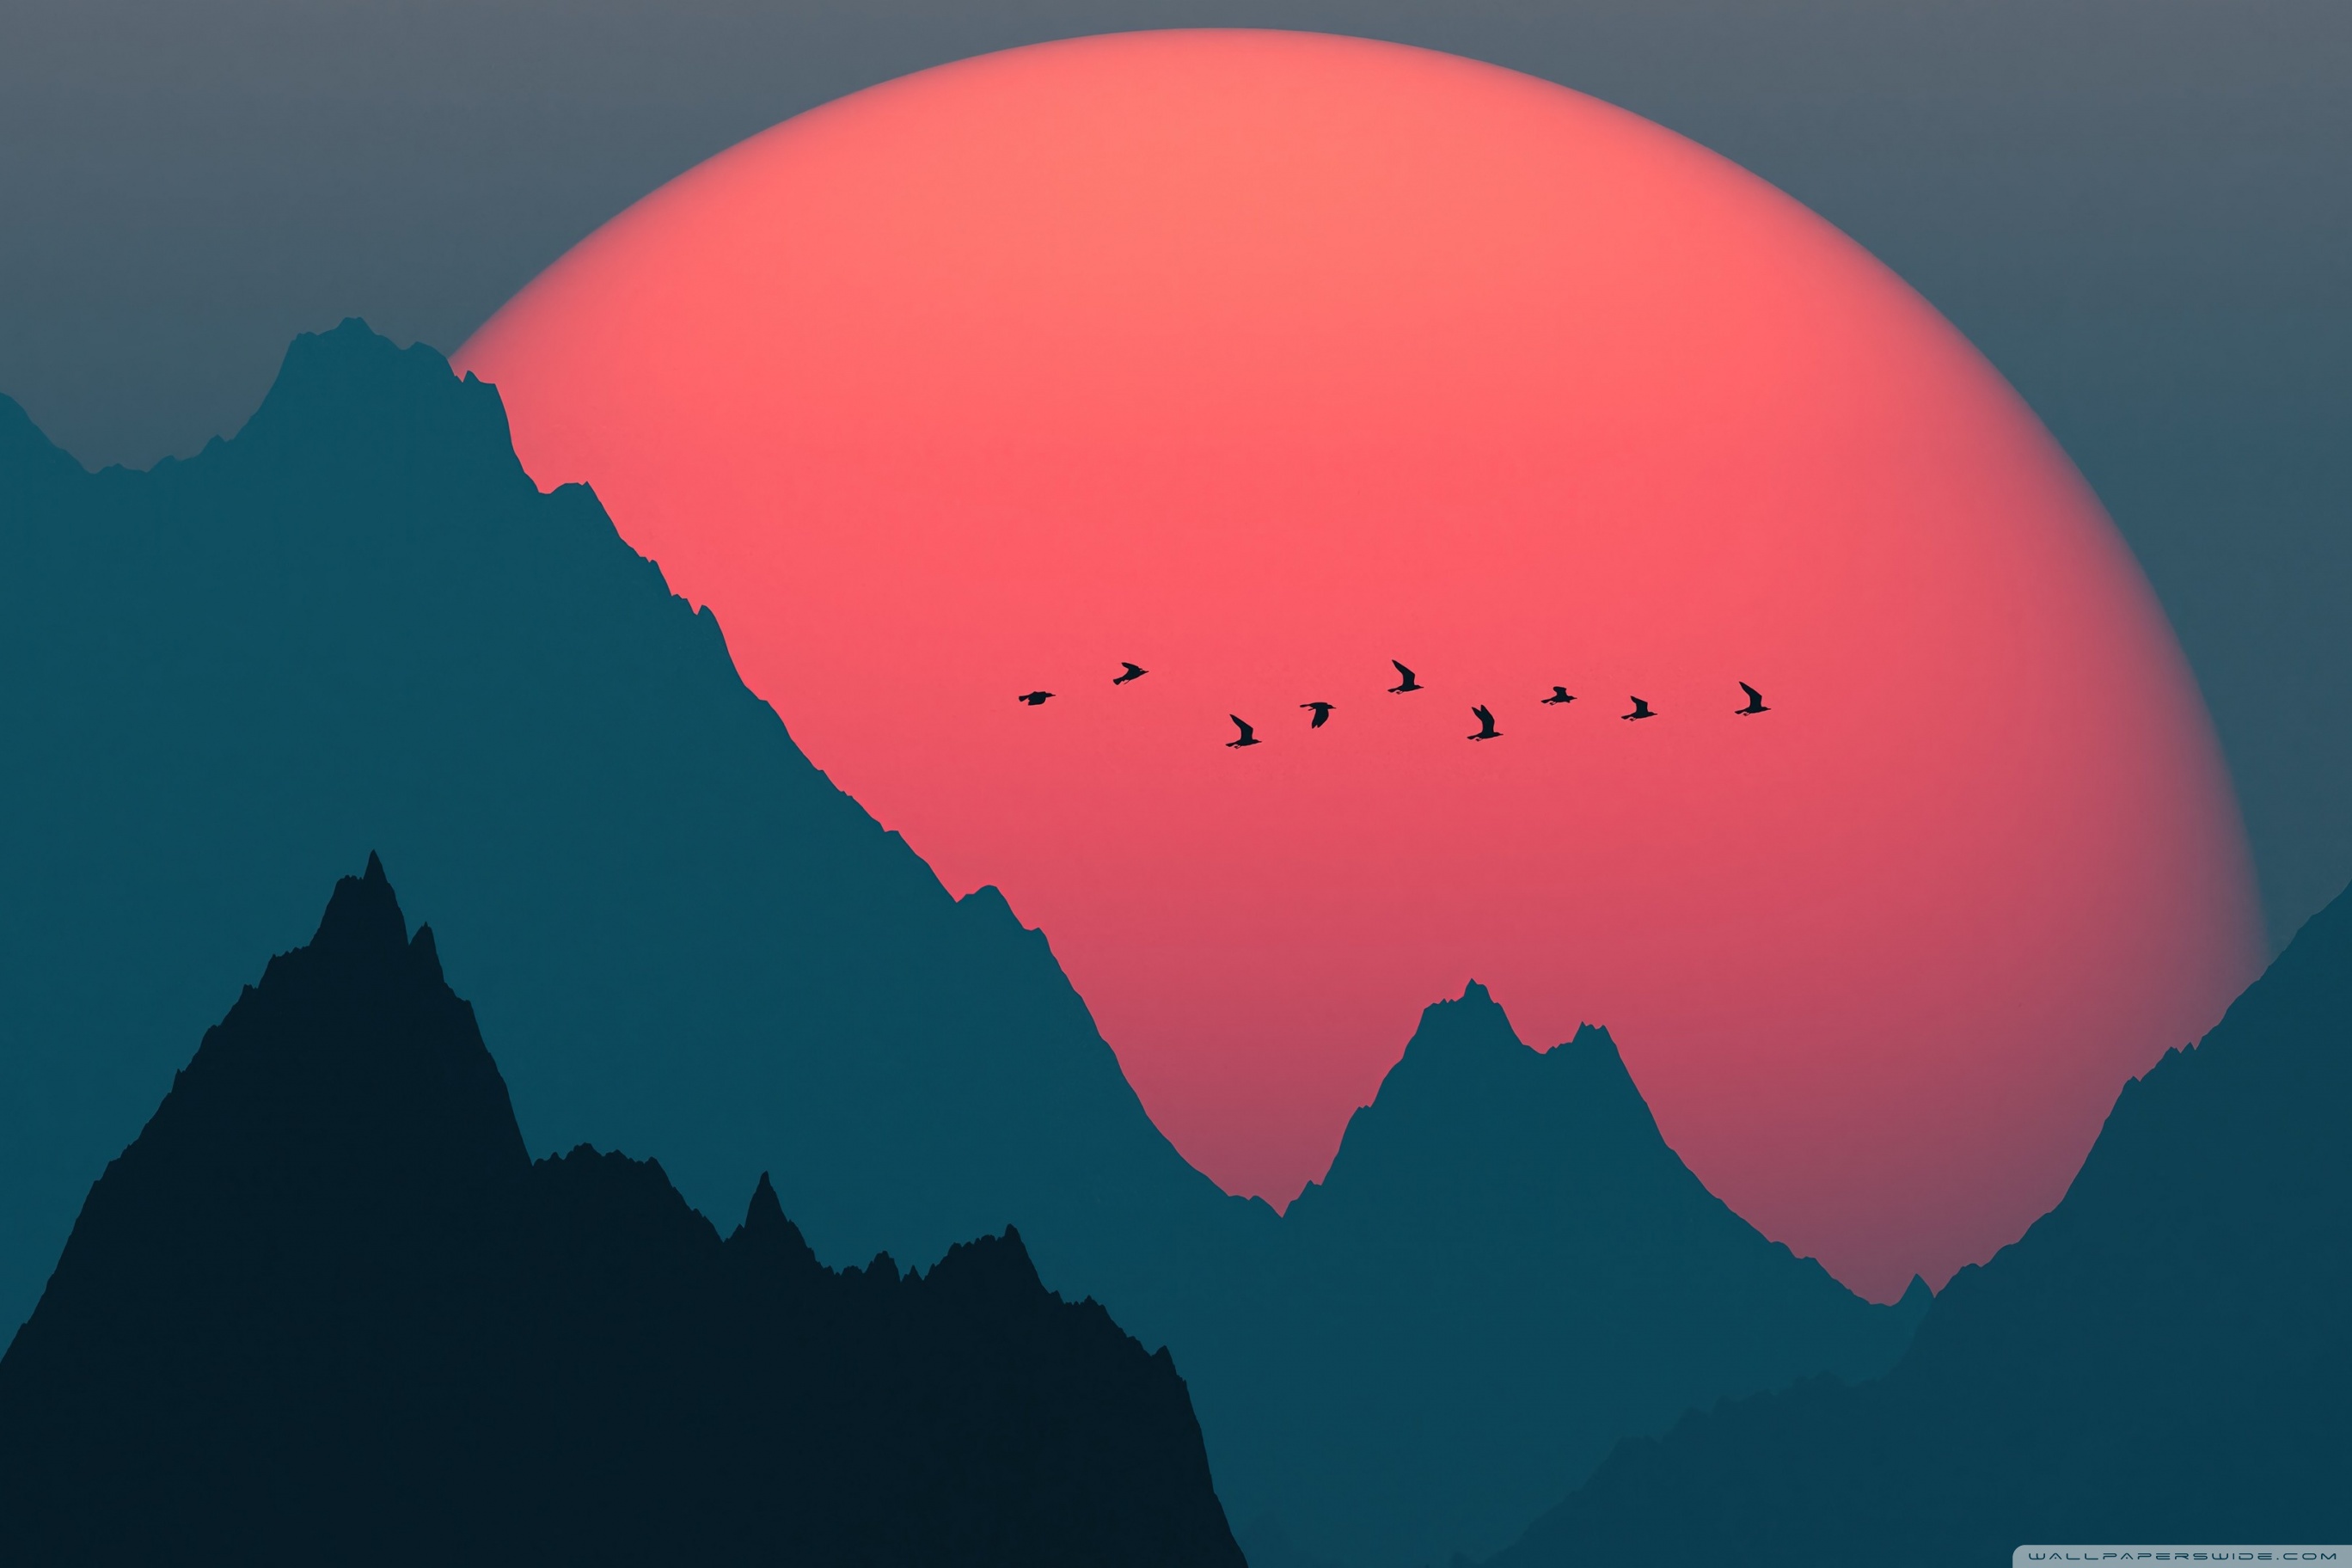 1366x768 Minimal Sunset Landscape 4k Laptop HD ,HD 4k Wallpapers,Images, Backgrounds,Photos and Pictures